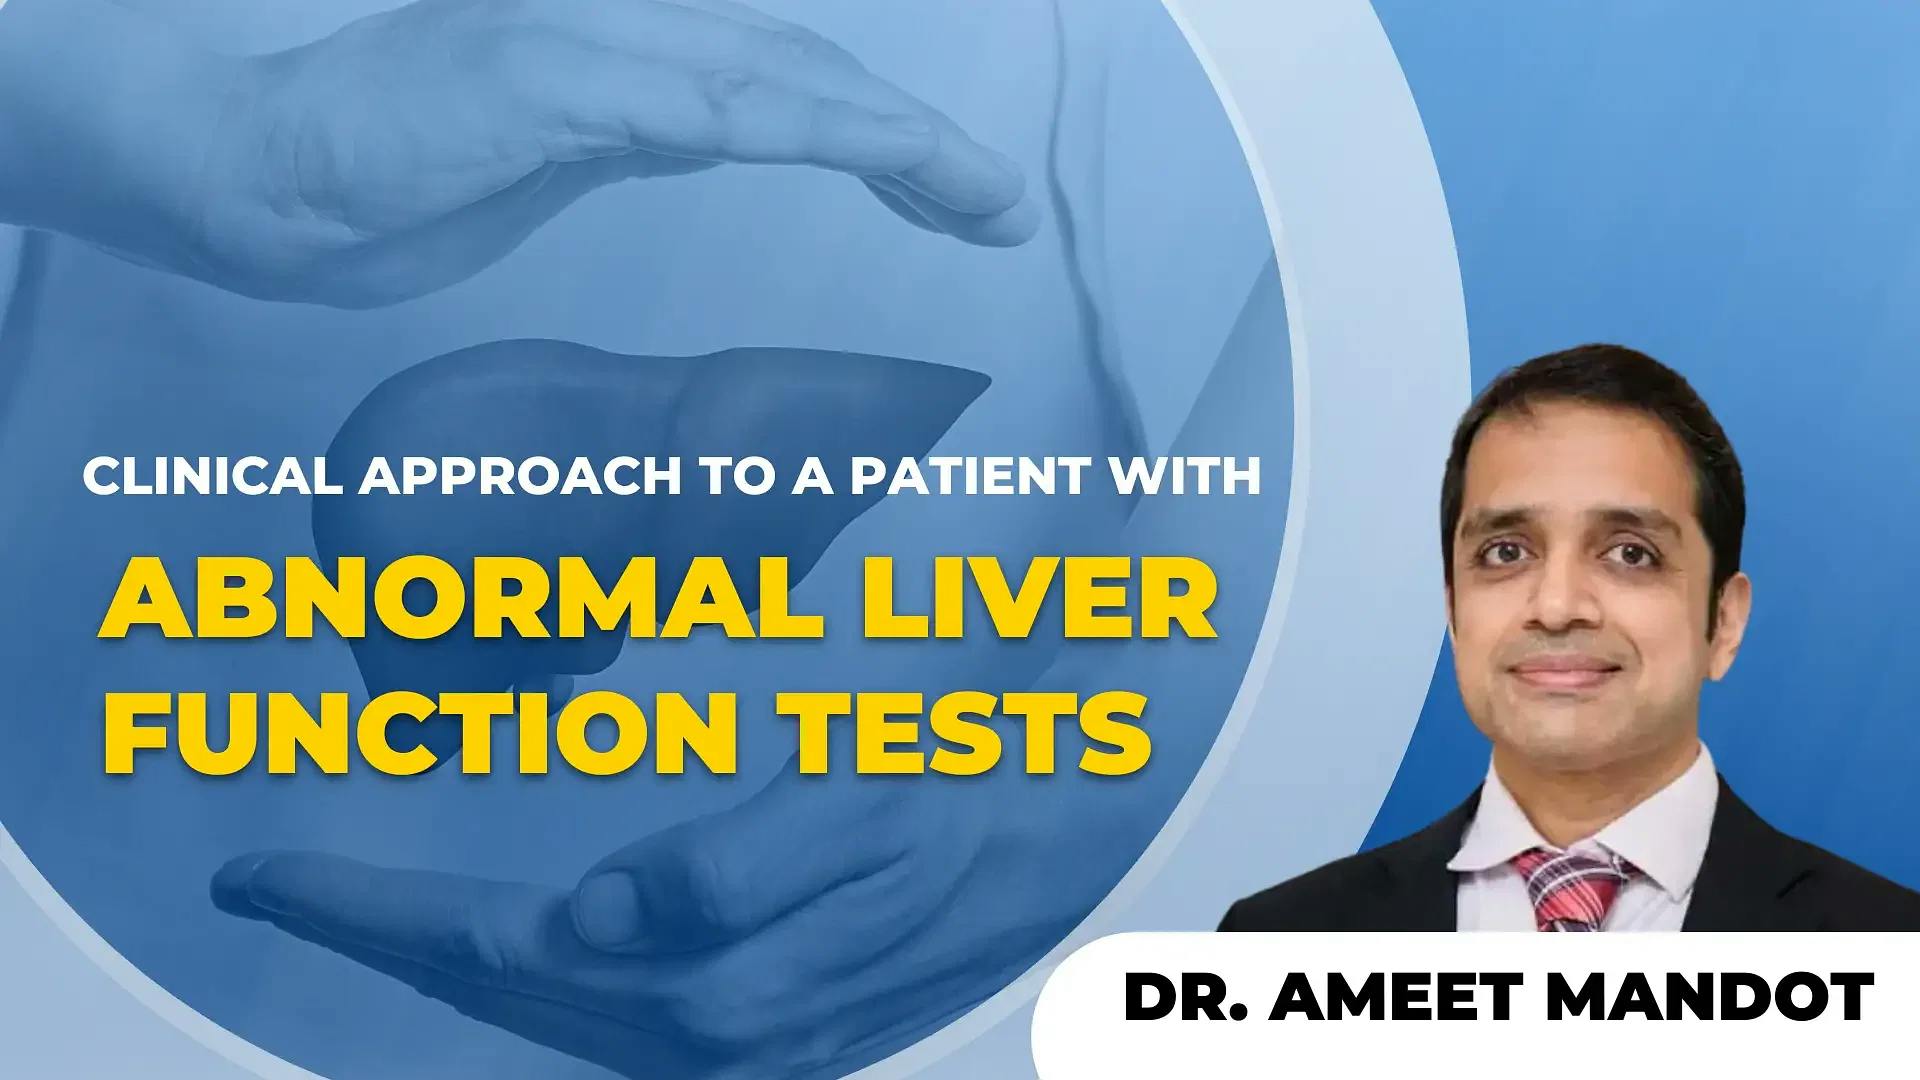 Clinical Approach to a Patient with Abnormal Liver Function Tests